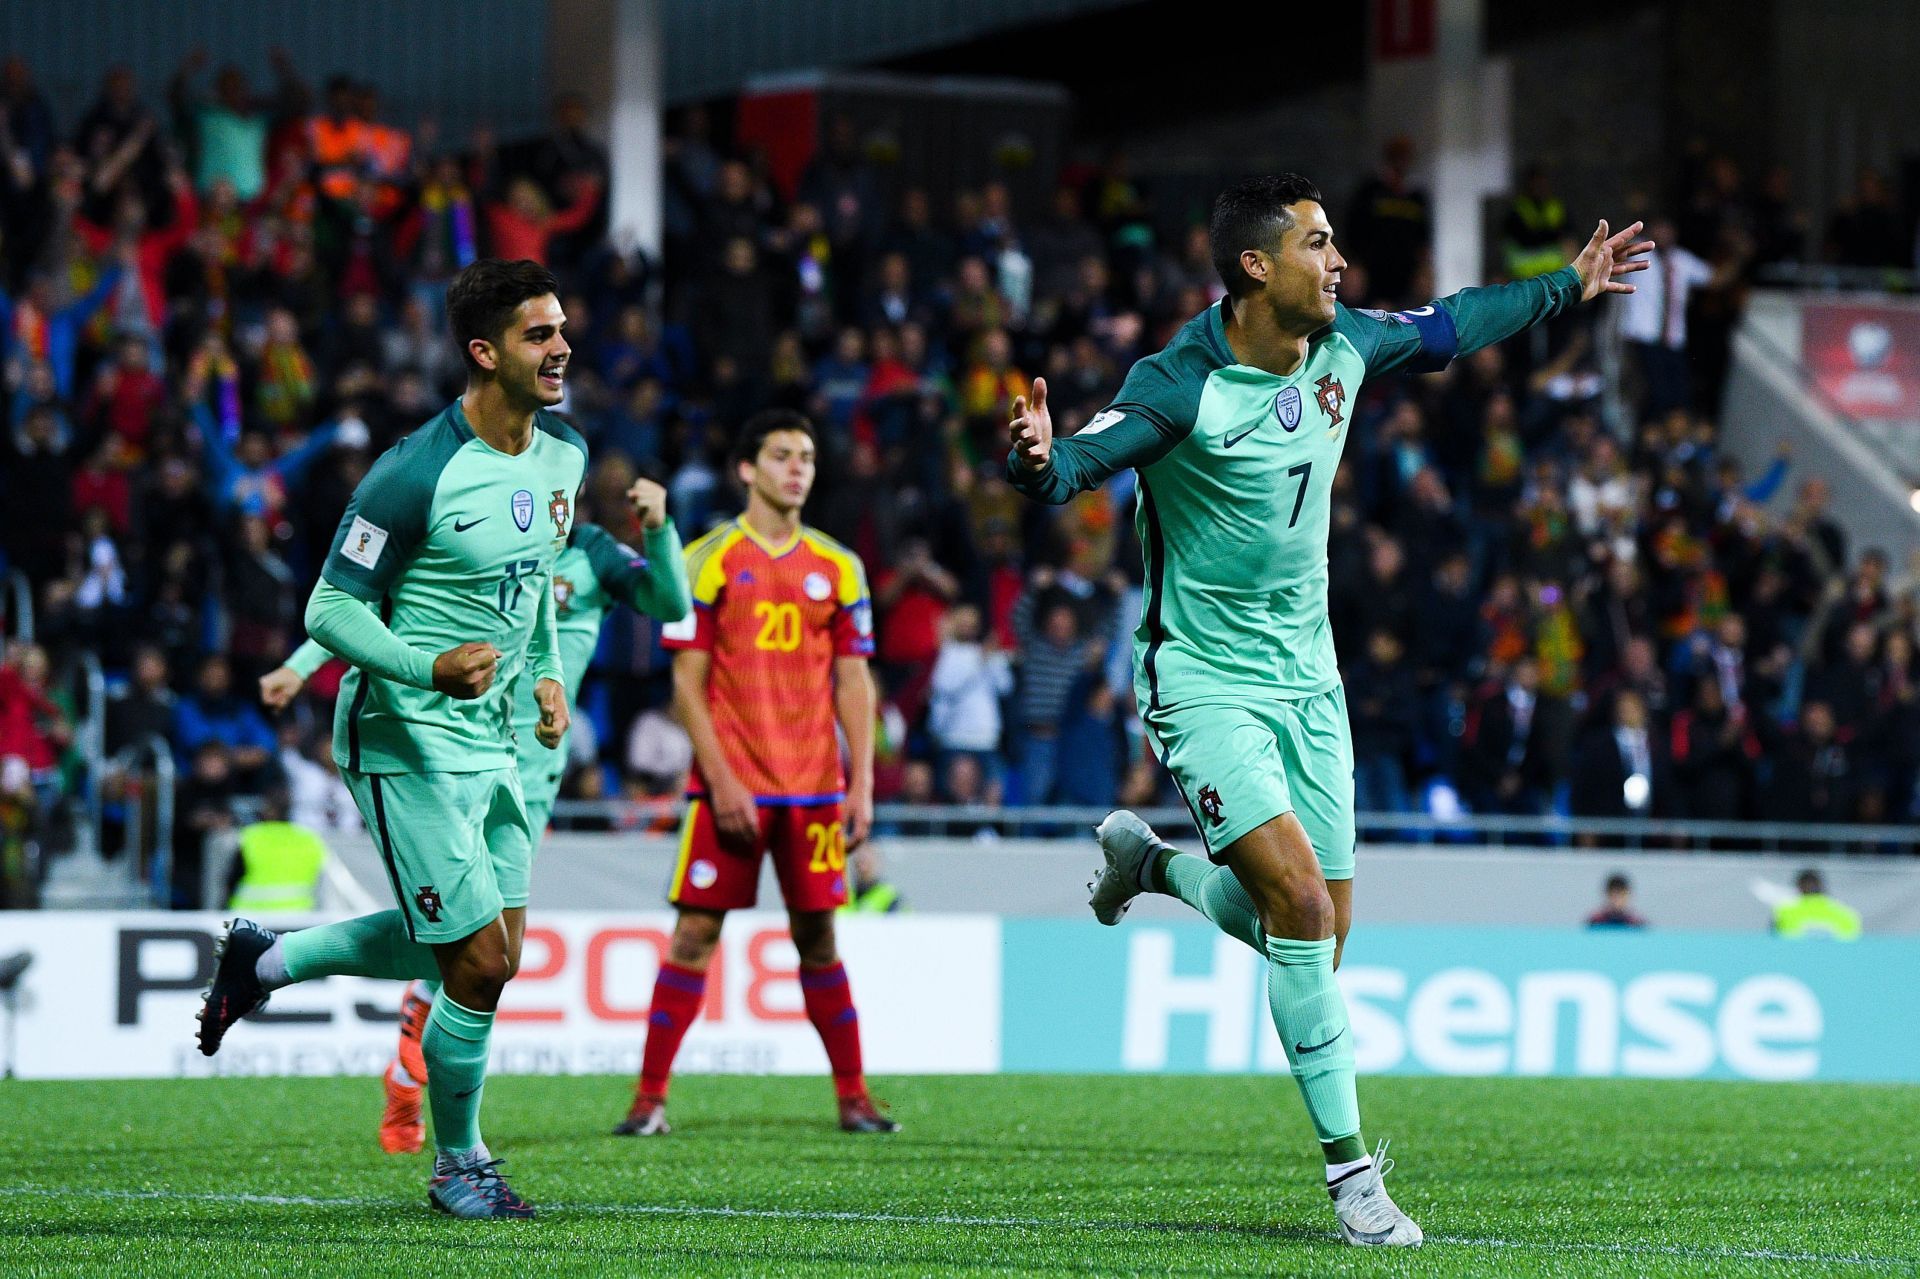 Ronaldo celebrates a goal against Andorra in the 2018 FIFA World Cup qualifiers